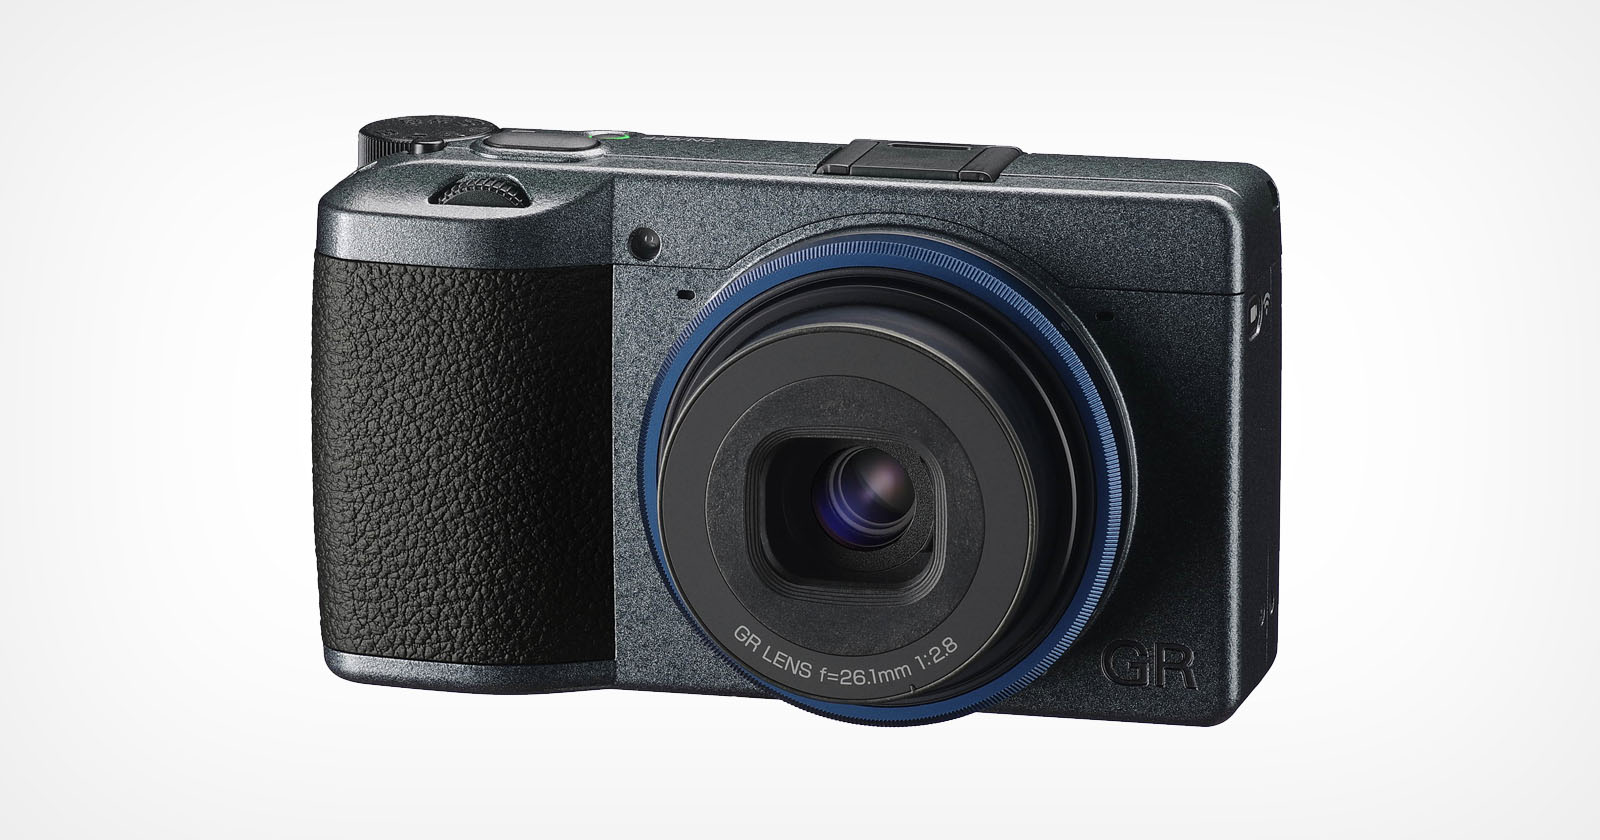 Ricoh Launches the GR IIIx Urban Edition Special Limited Camera